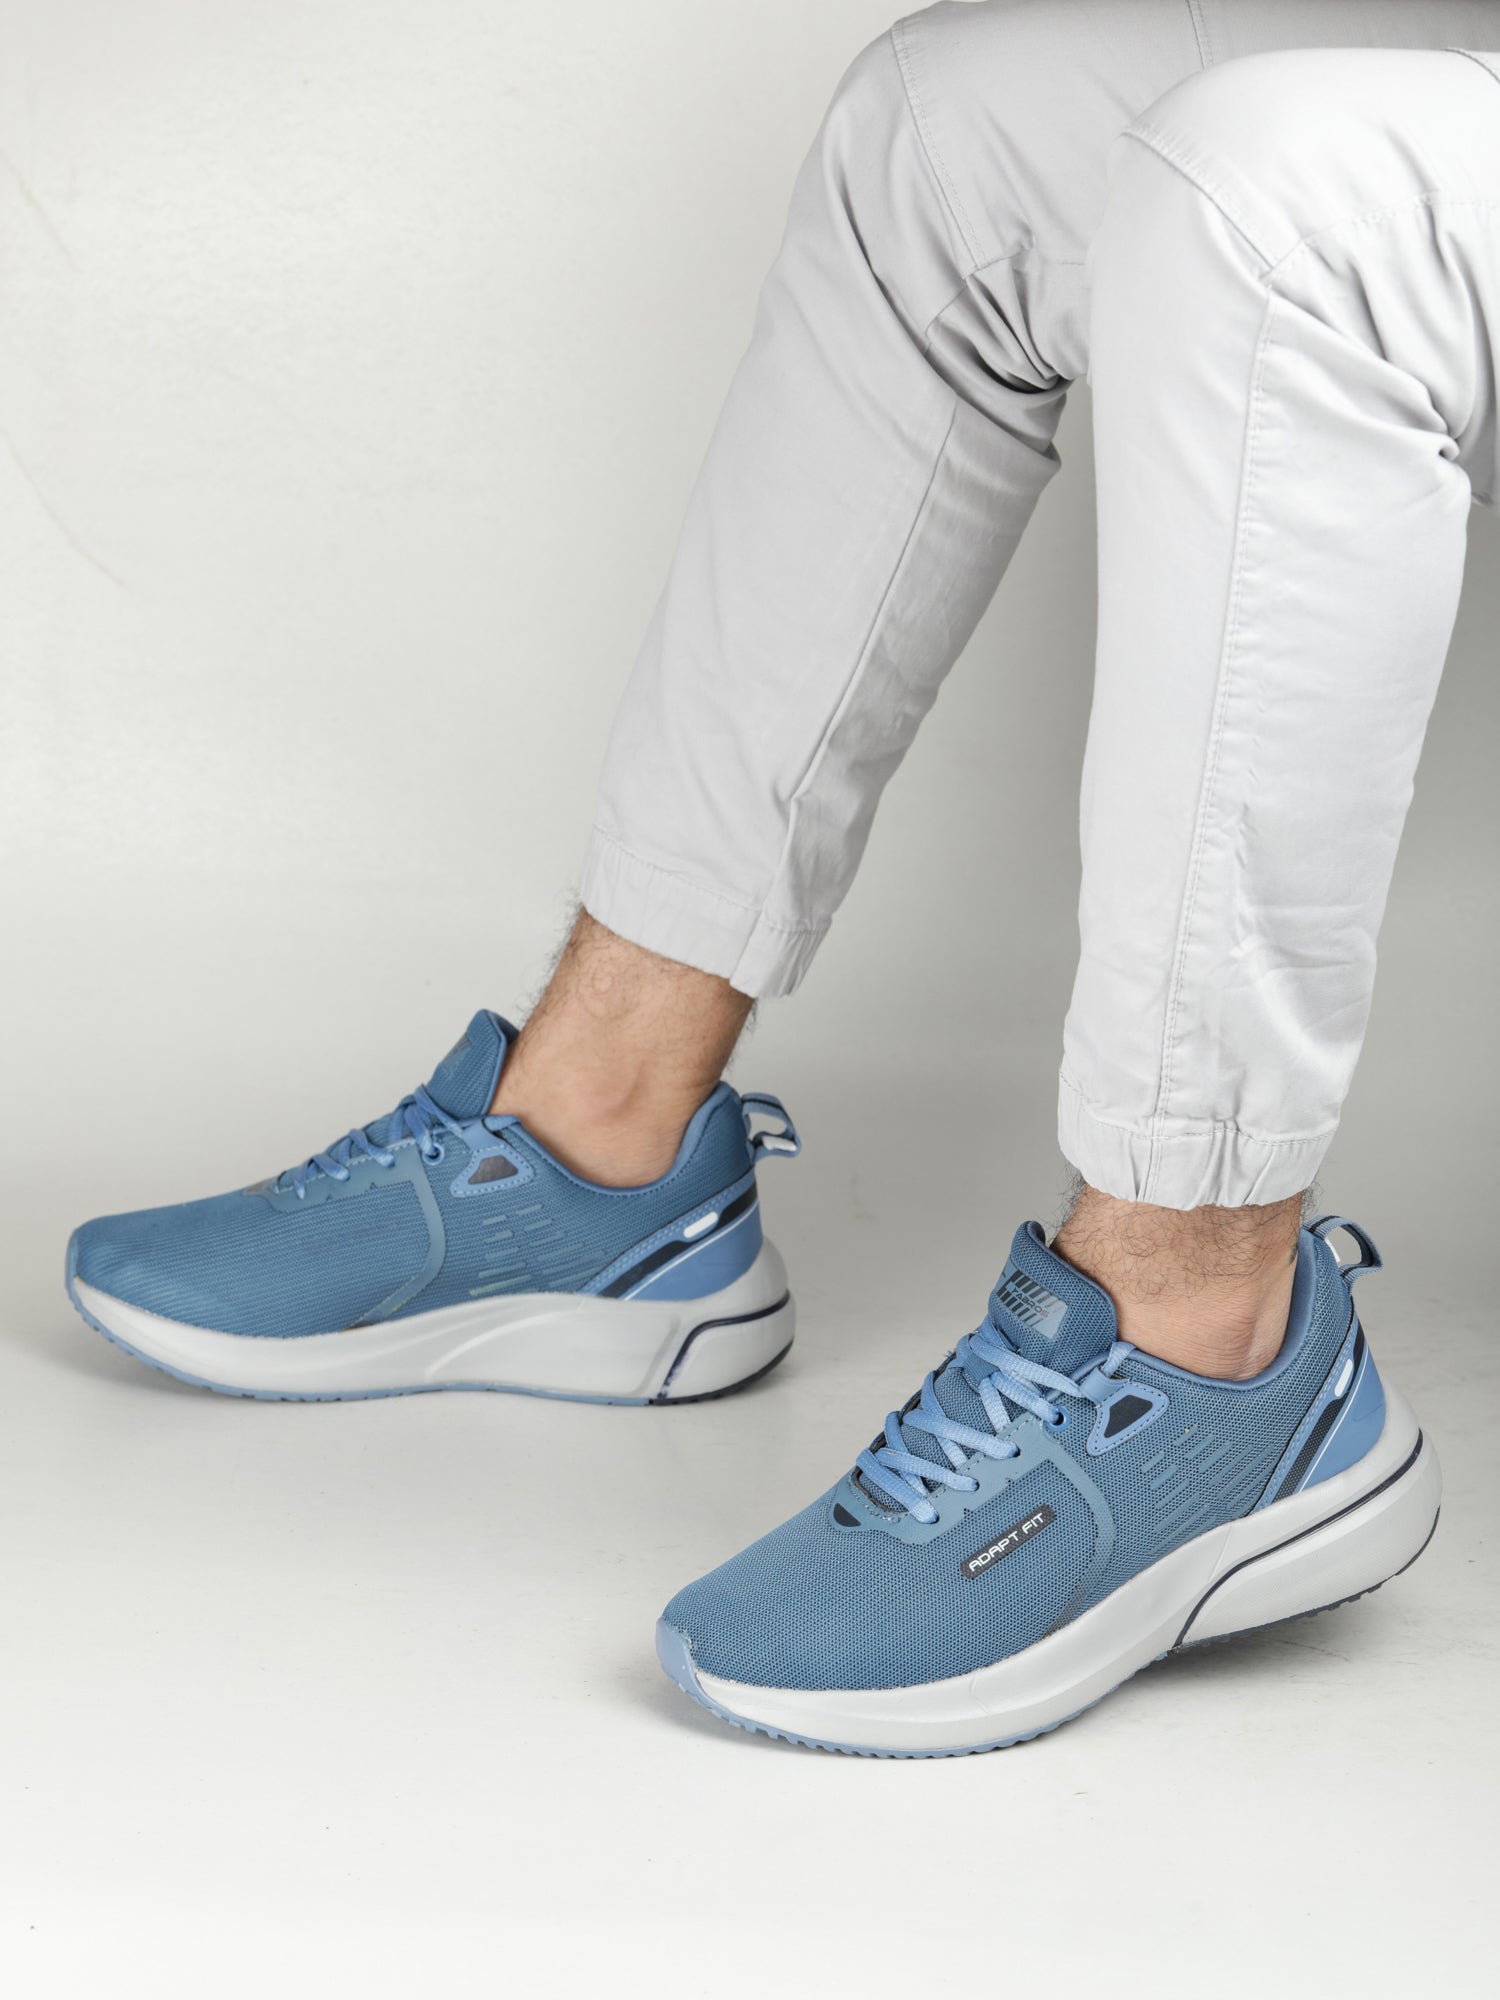 Ethan Sports Shoes For Men